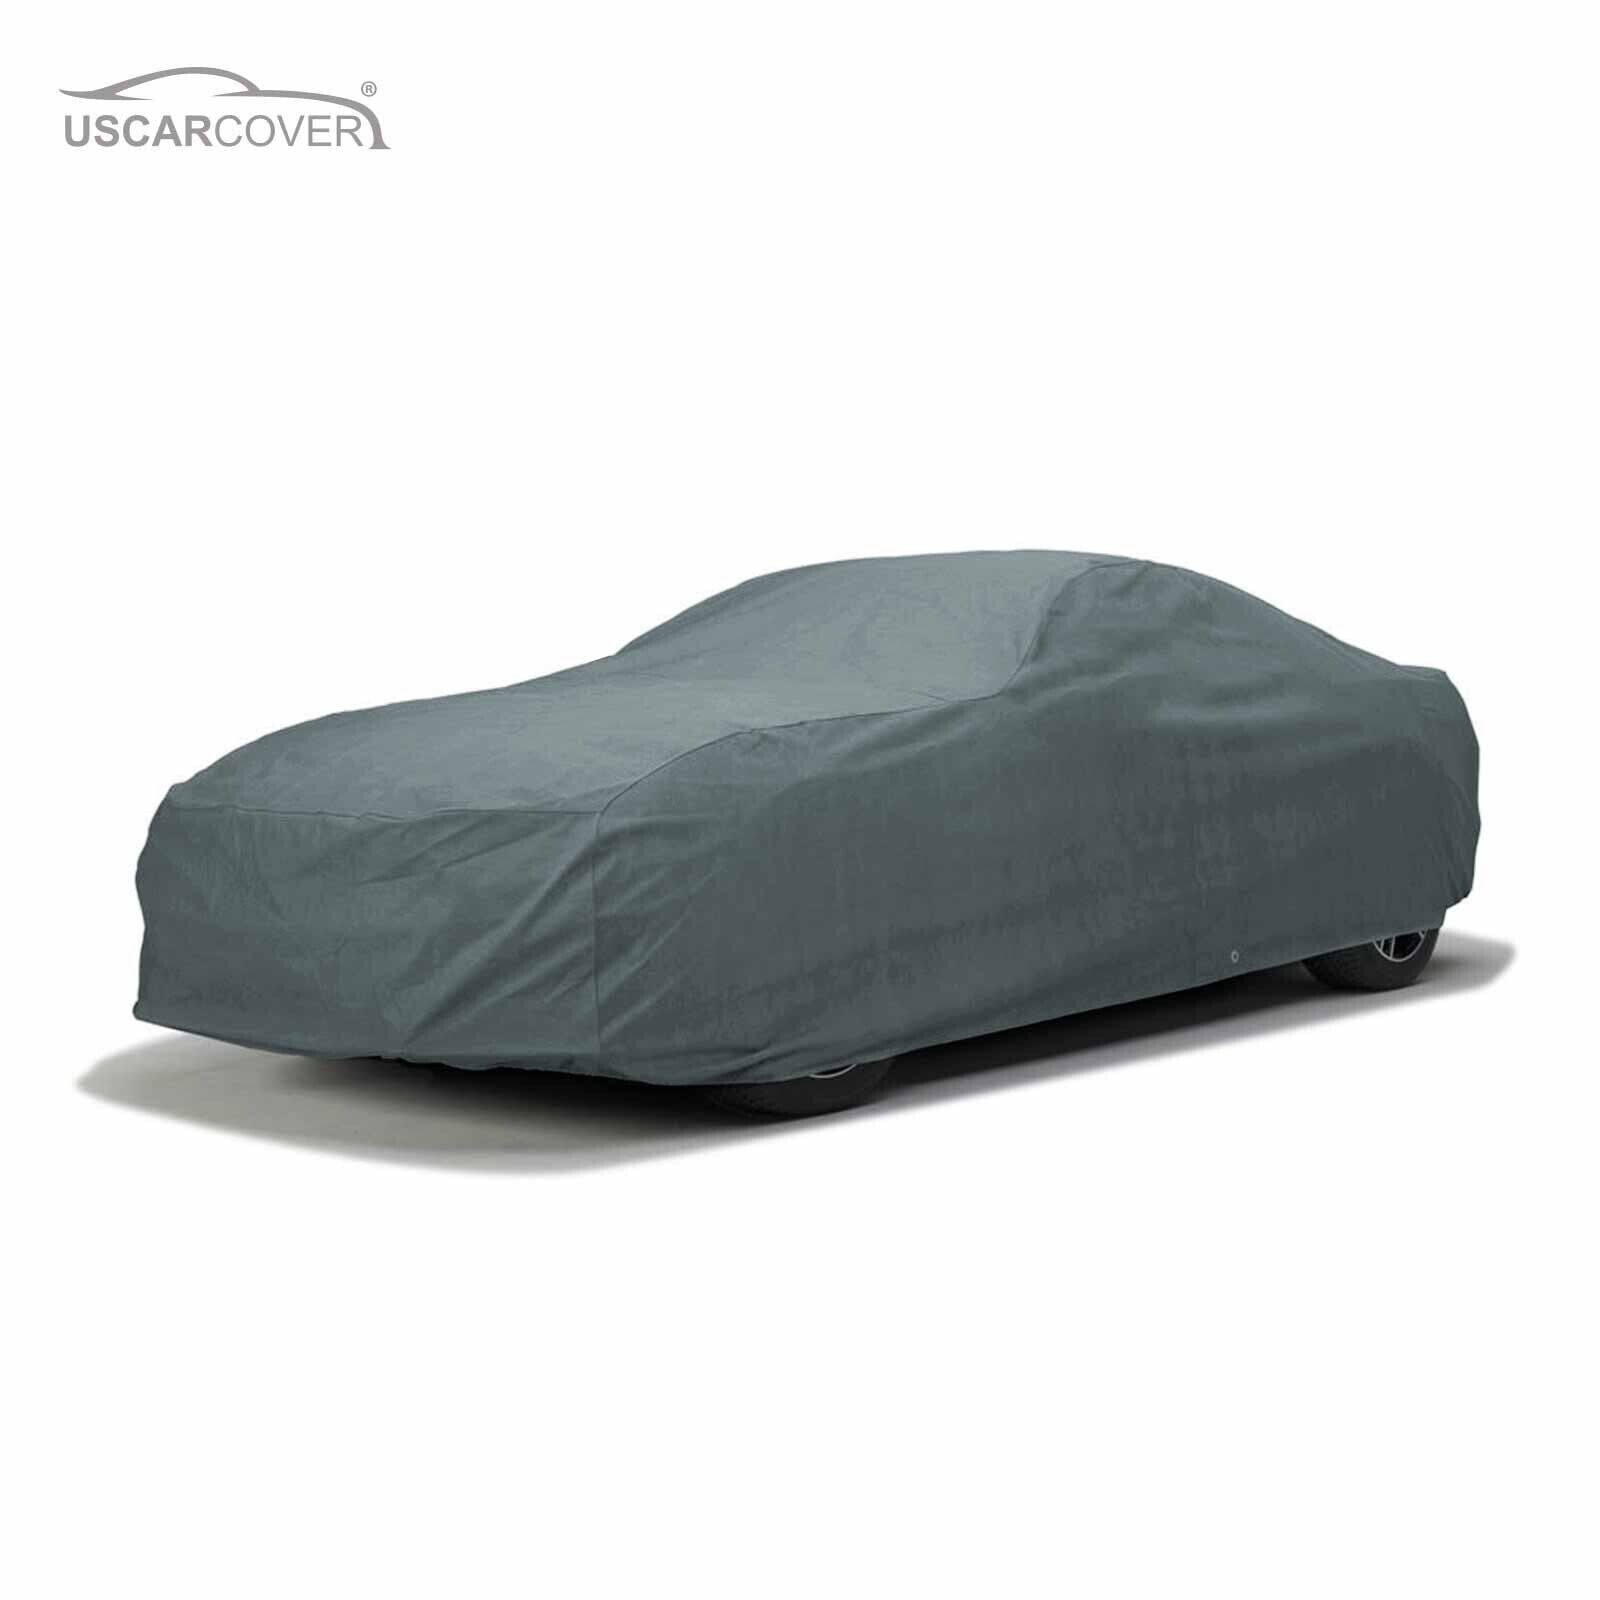 WeatherTec UHD 5 Layer Full Car Cover for Buick Skylark 1964-1972 Coupe